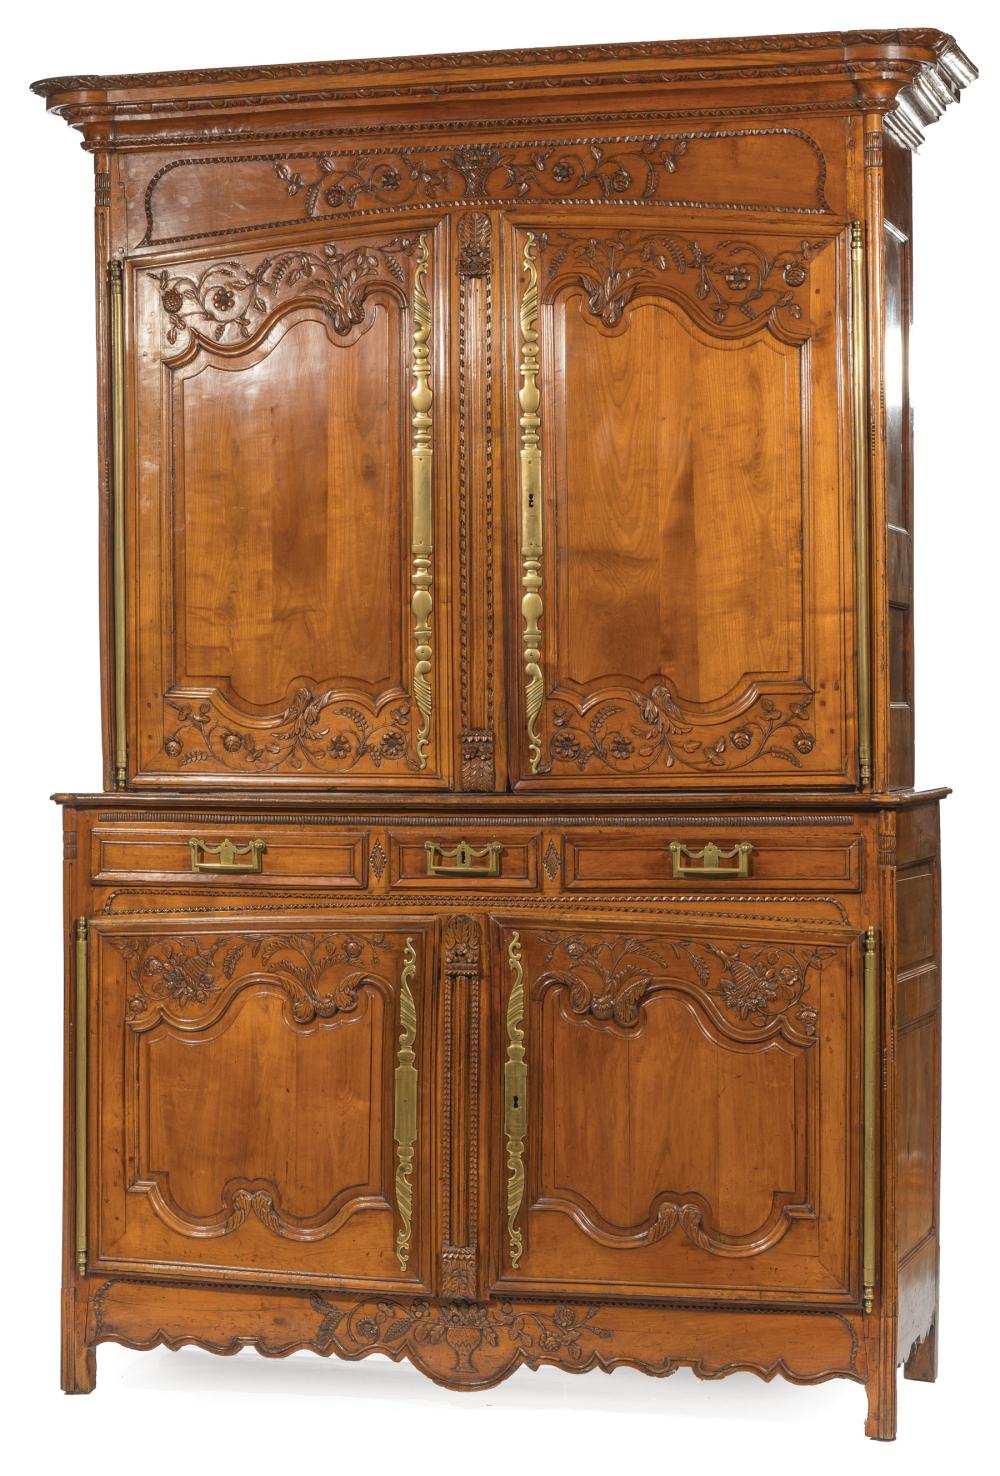 PROVINCIAL CARVED CHERRYWOOD BUFFET